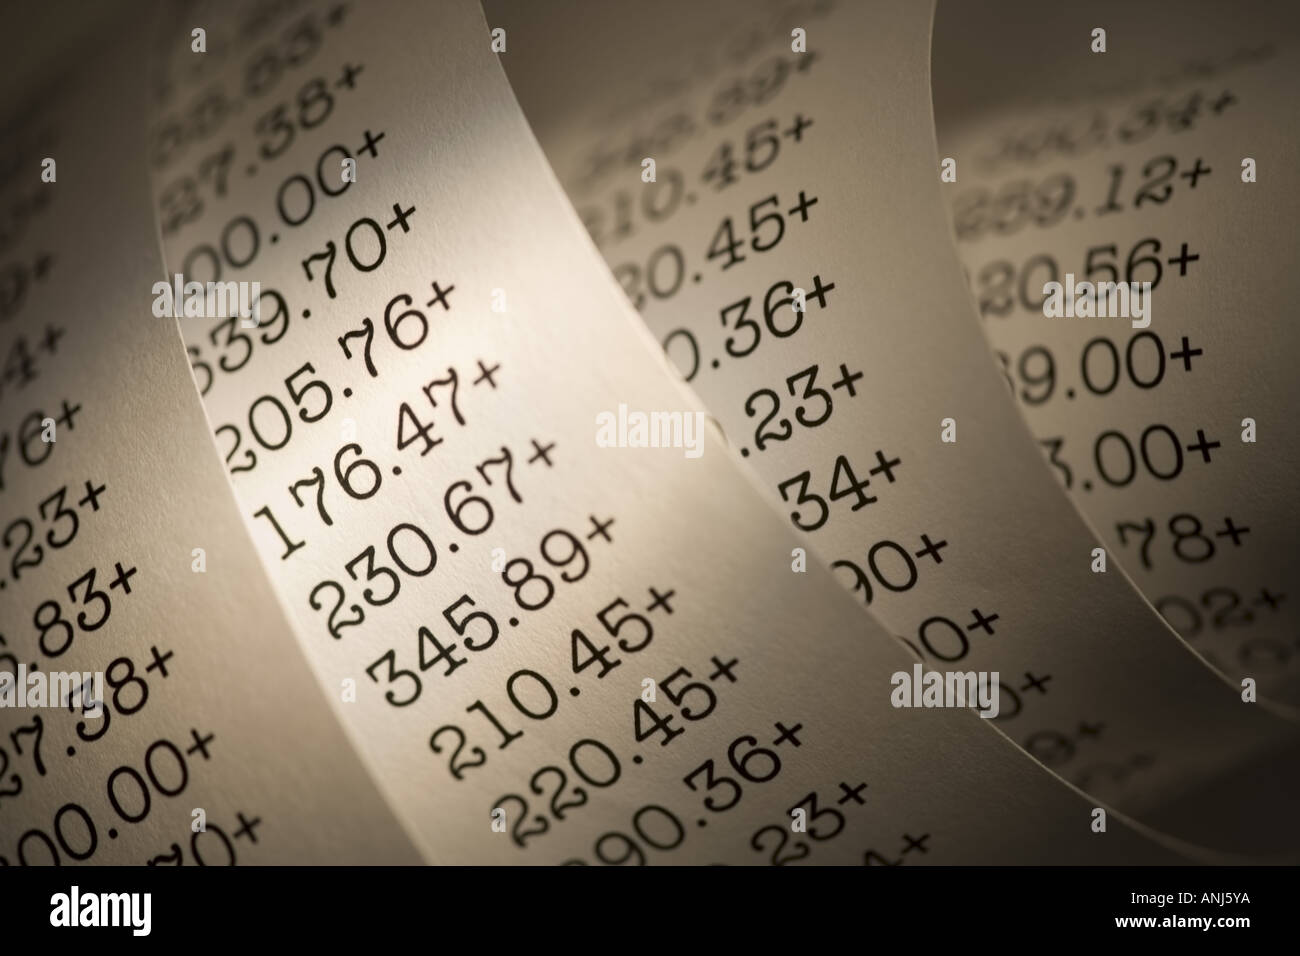 Close up of a receipt Stock Photo